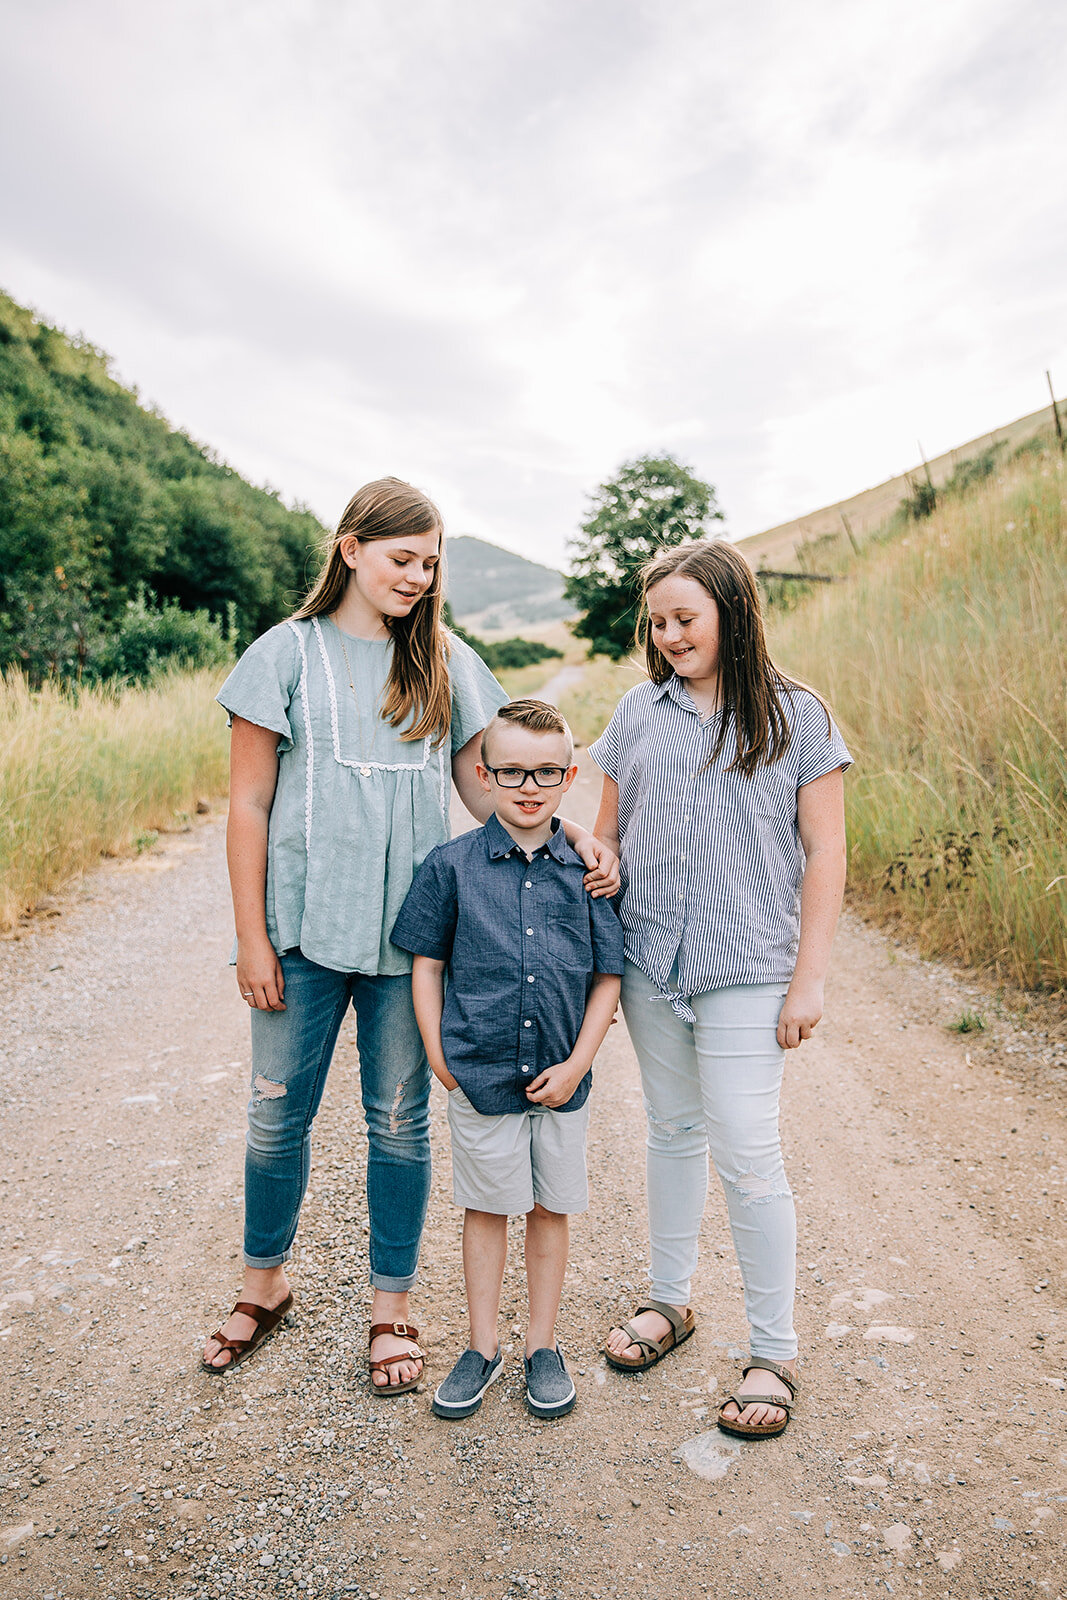  siblings cousins family pictures summertime hyrum utah paradise utah yellow fields family photographer mint blue denim teal outfit coordination family photos outfit color scheme professional family photography by bella alder extended family photos w